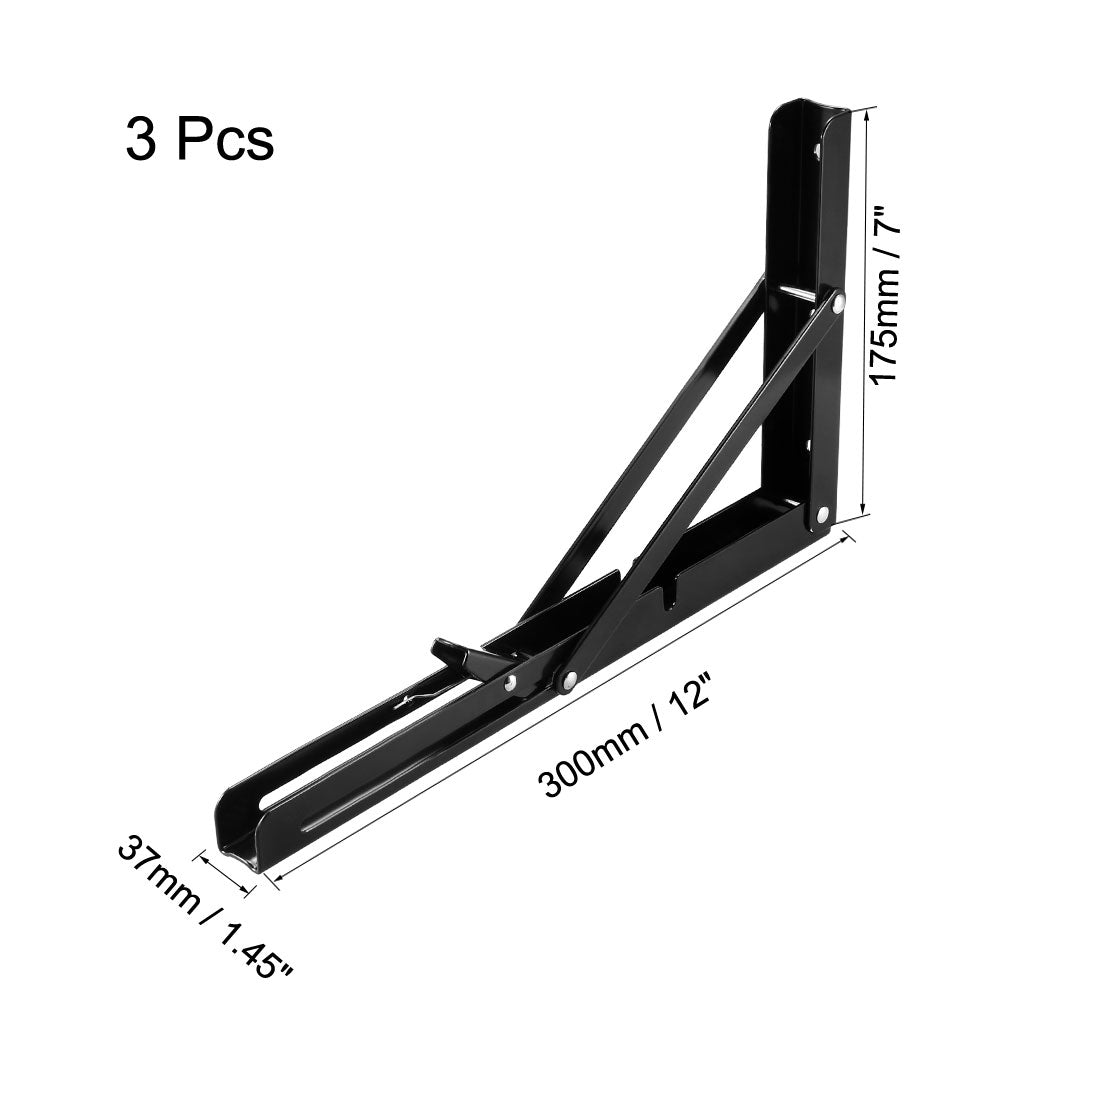 uxcell Uxcell Folding Bracket 12 inch 300mm for Shelves Table Desk Wall Mounted Support Collapsible Long Release Arm Space Saving Carbon Steel 3pcs